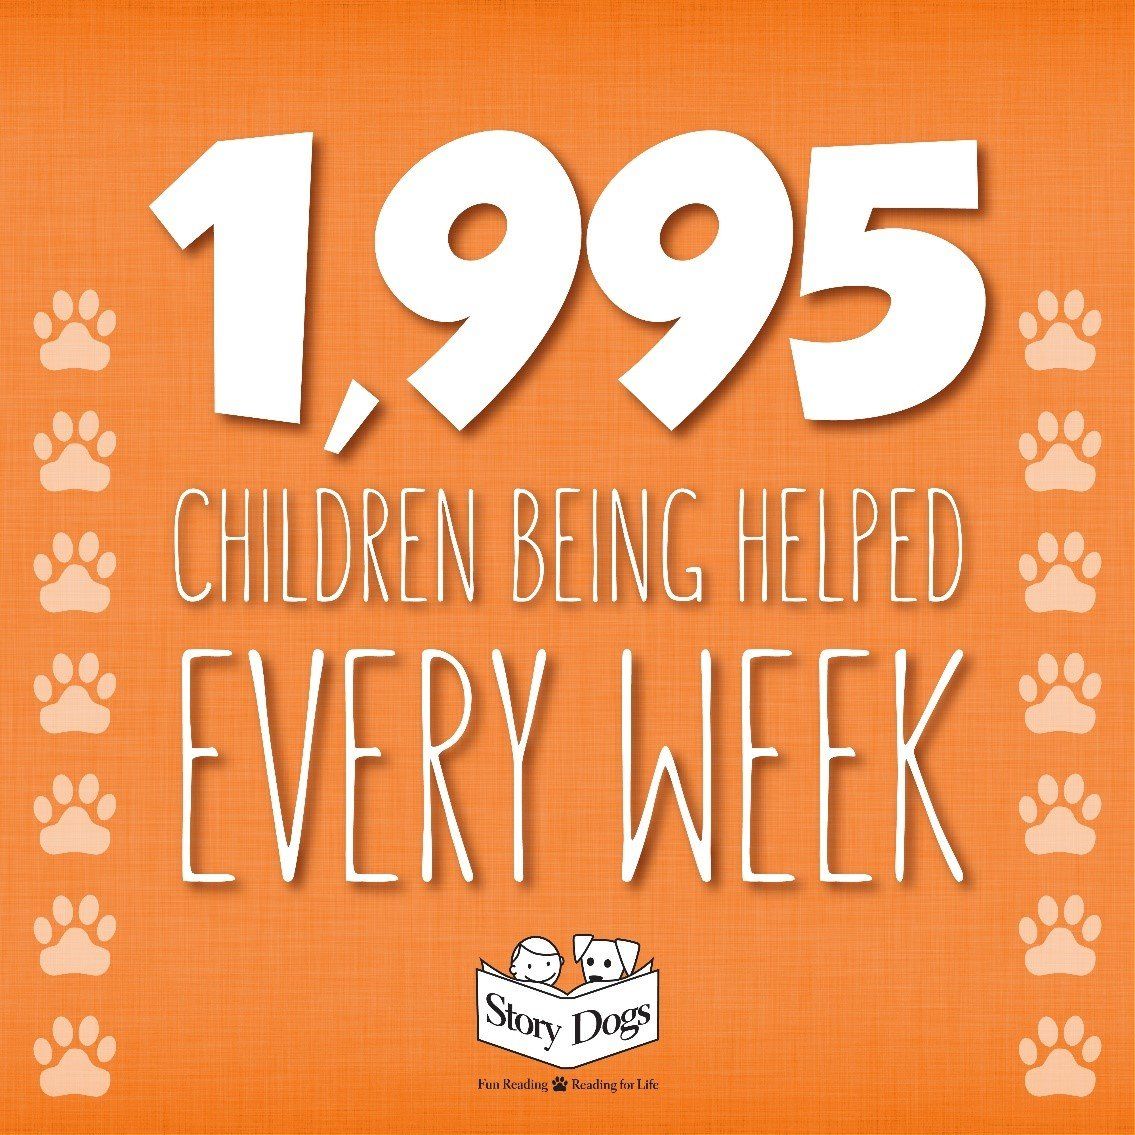 Story Dogs are helping 1,995 children learn to read every week